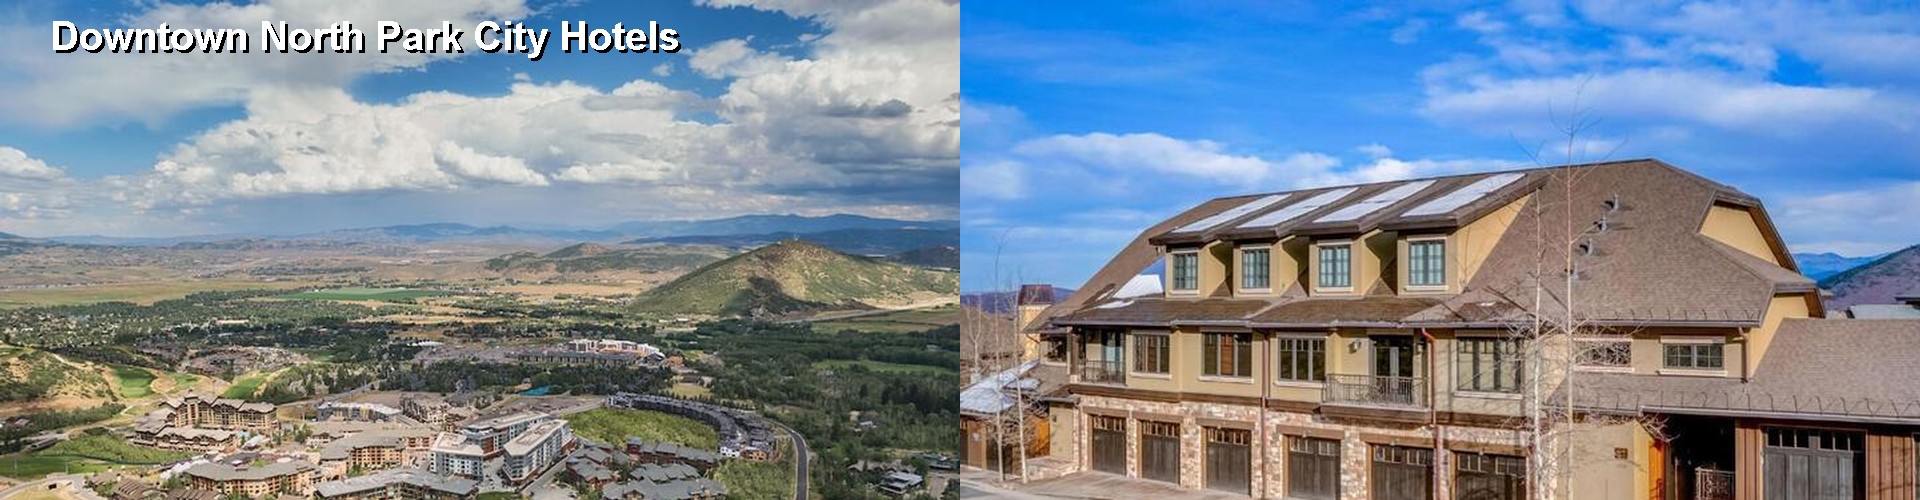 5 Best Hotels near Downtown North Park City